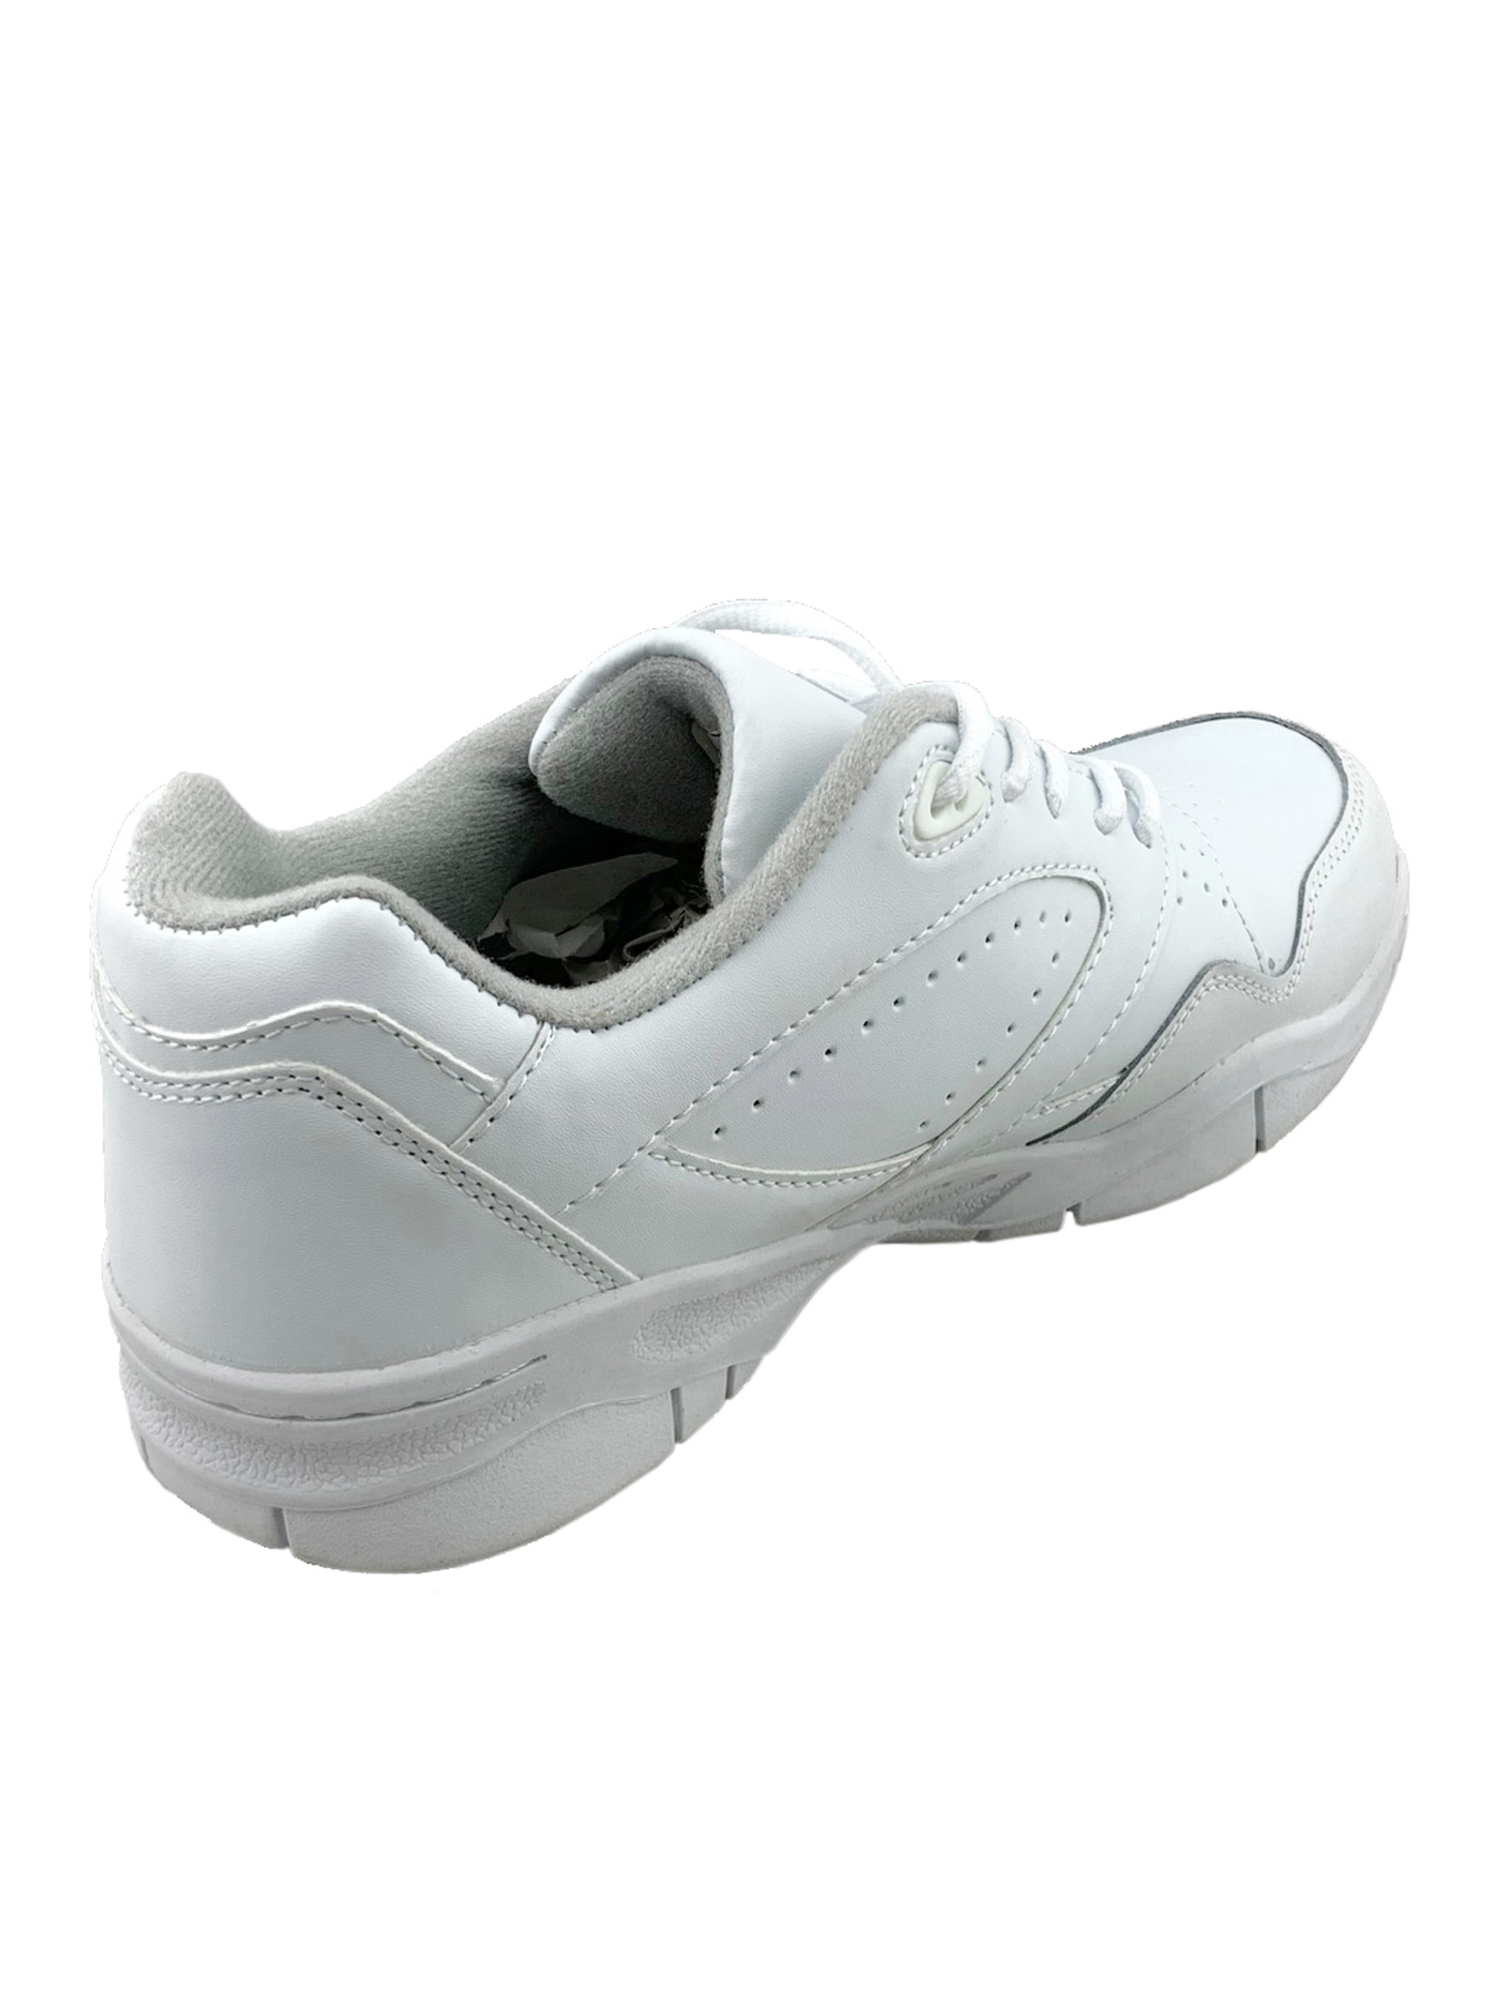 Tanleewa Men's Leather White Sports Shoes Lightweight Sneakers Breathable Casual Shoe Size 8 - image 5 of 5